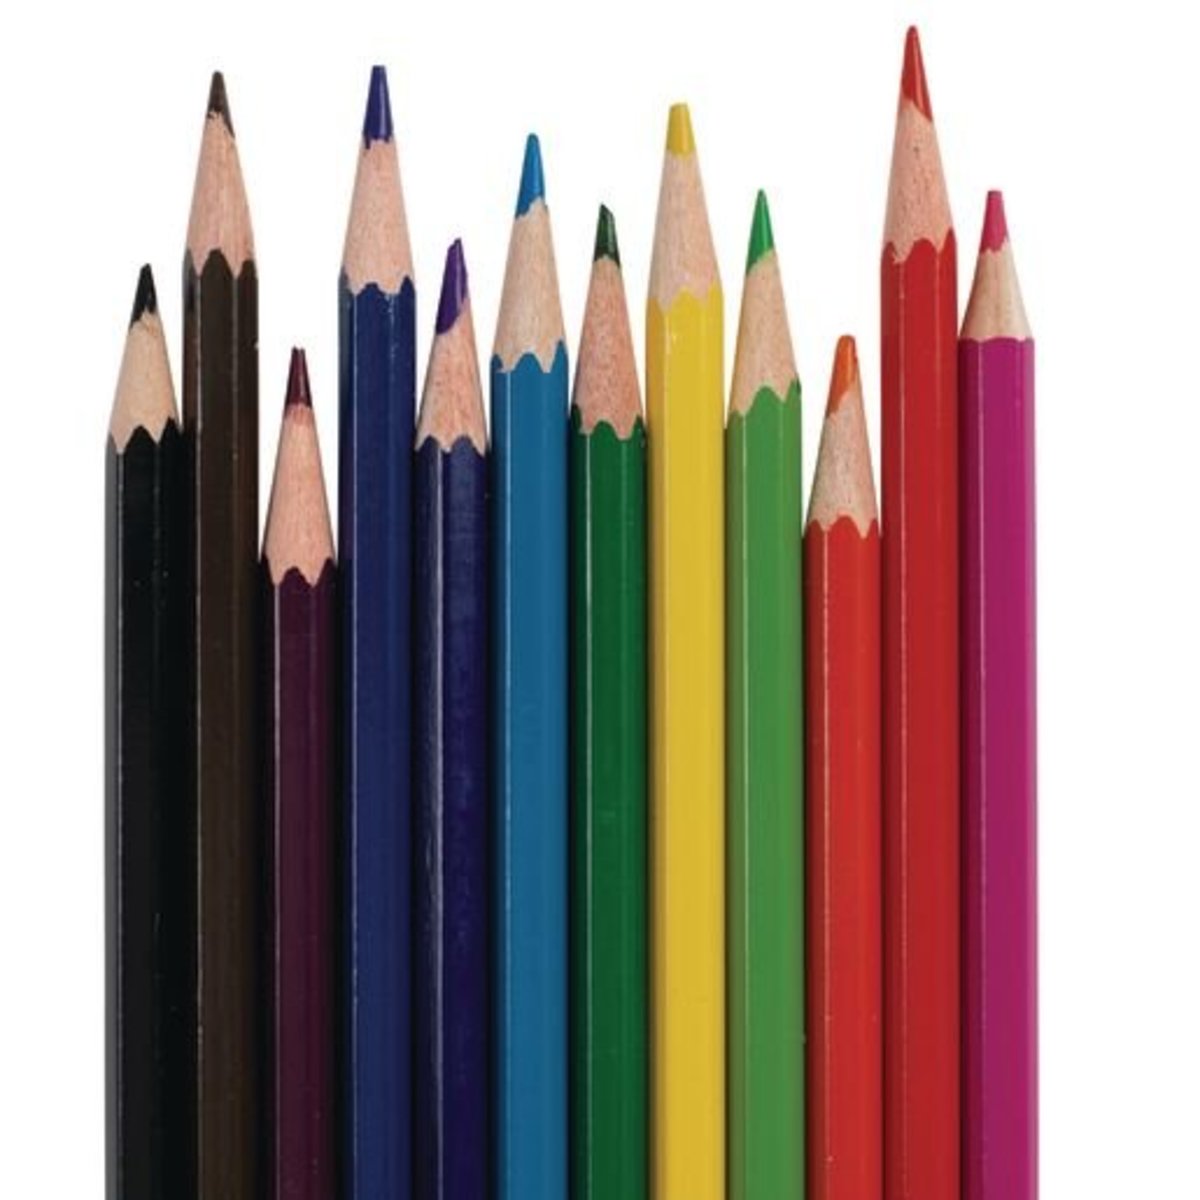 Colored pencils are an economical and easy way to start your coloring journey